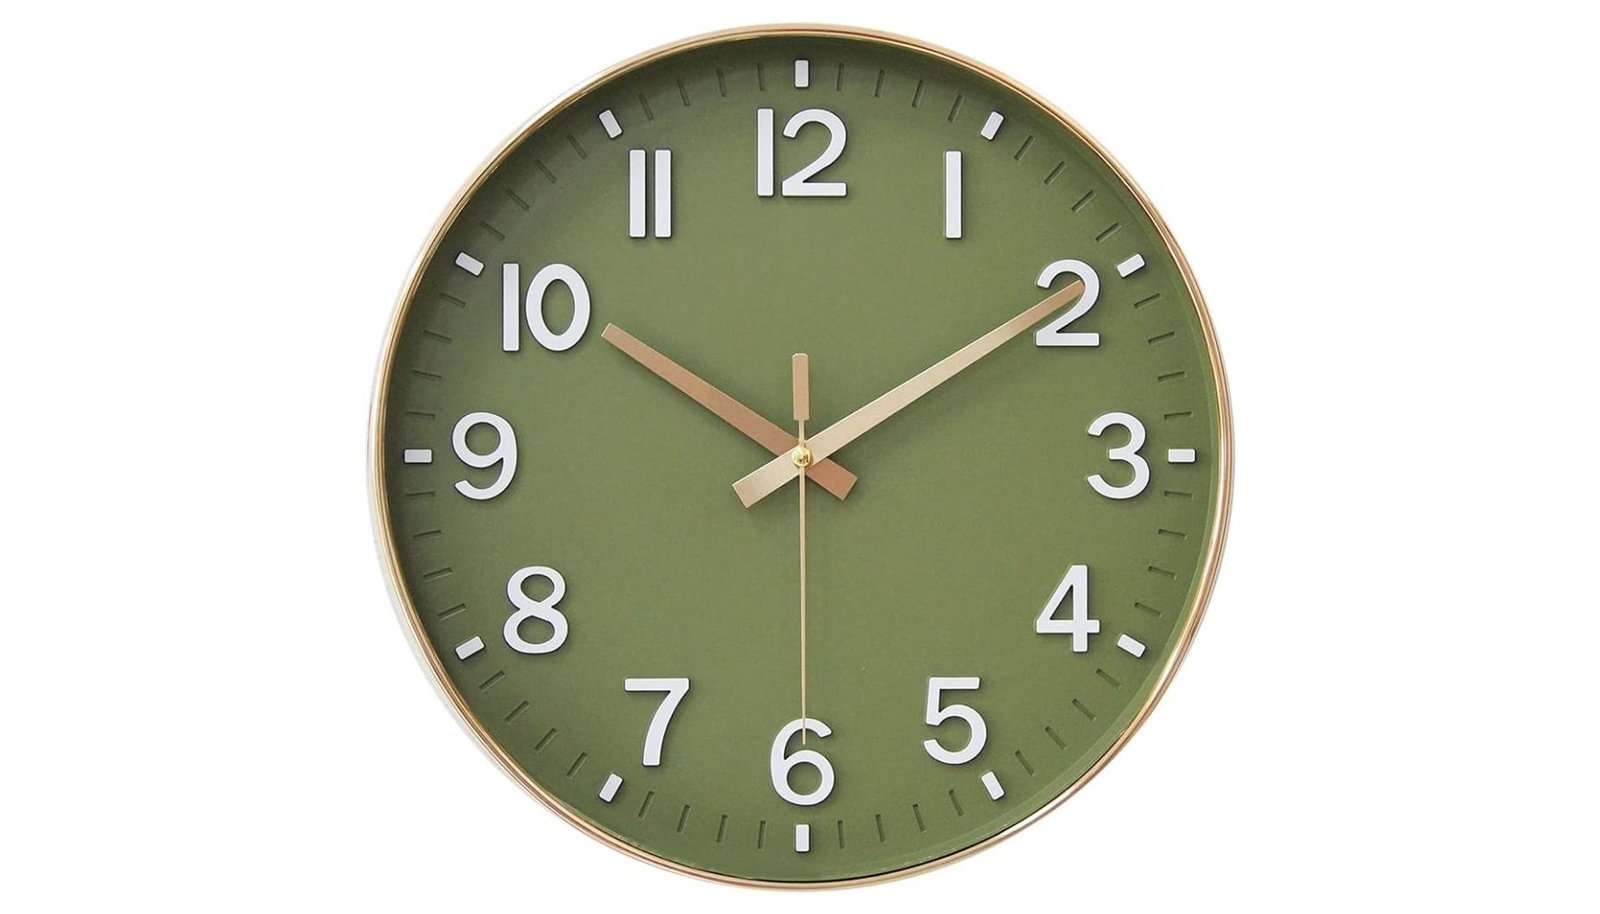 HZDHCLH 12 Inch Living Room Modern Wall Clock Review